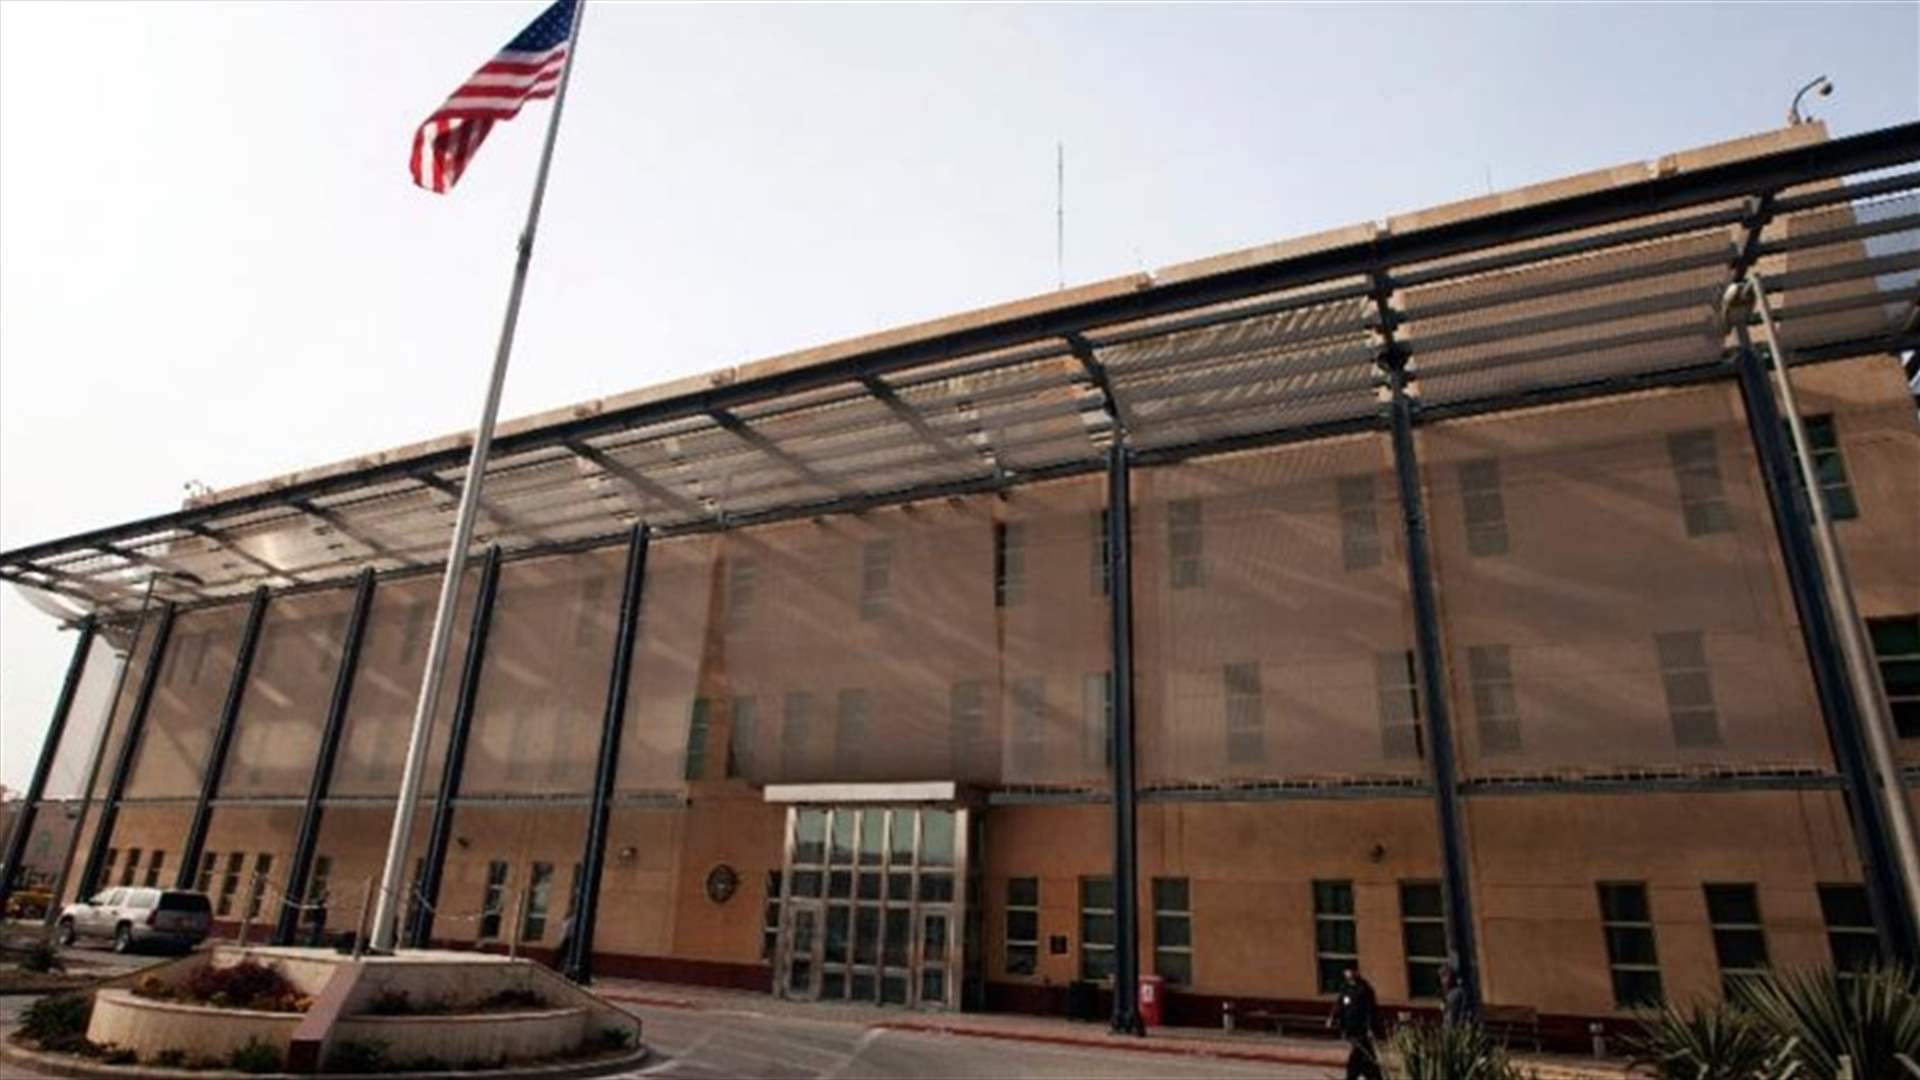 About seven mortar rounds landed in US embassy compound in Baghdad